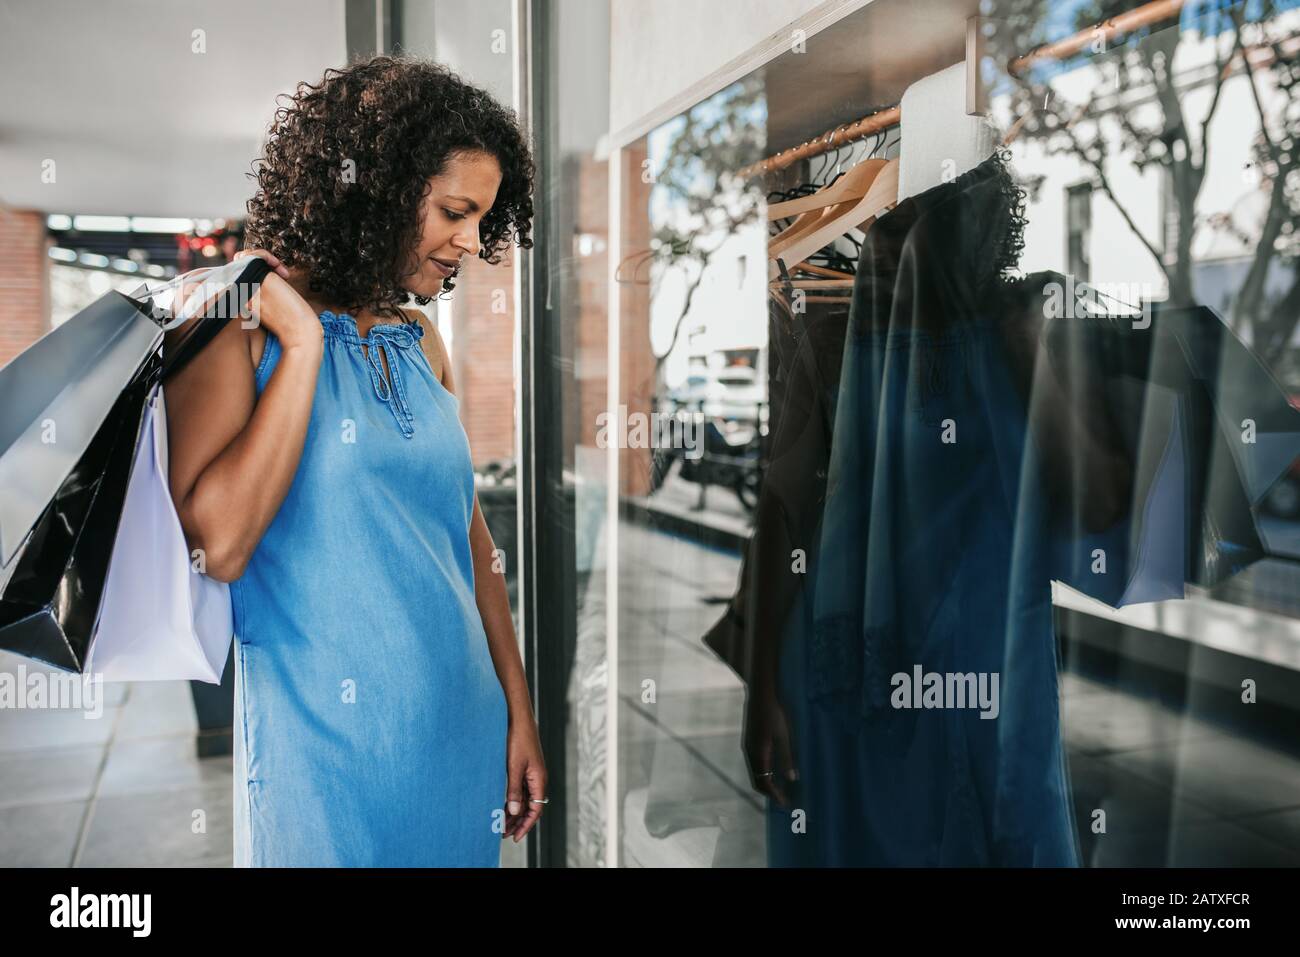 Smiling woman looking at clothing in a boutique window Stock Photo